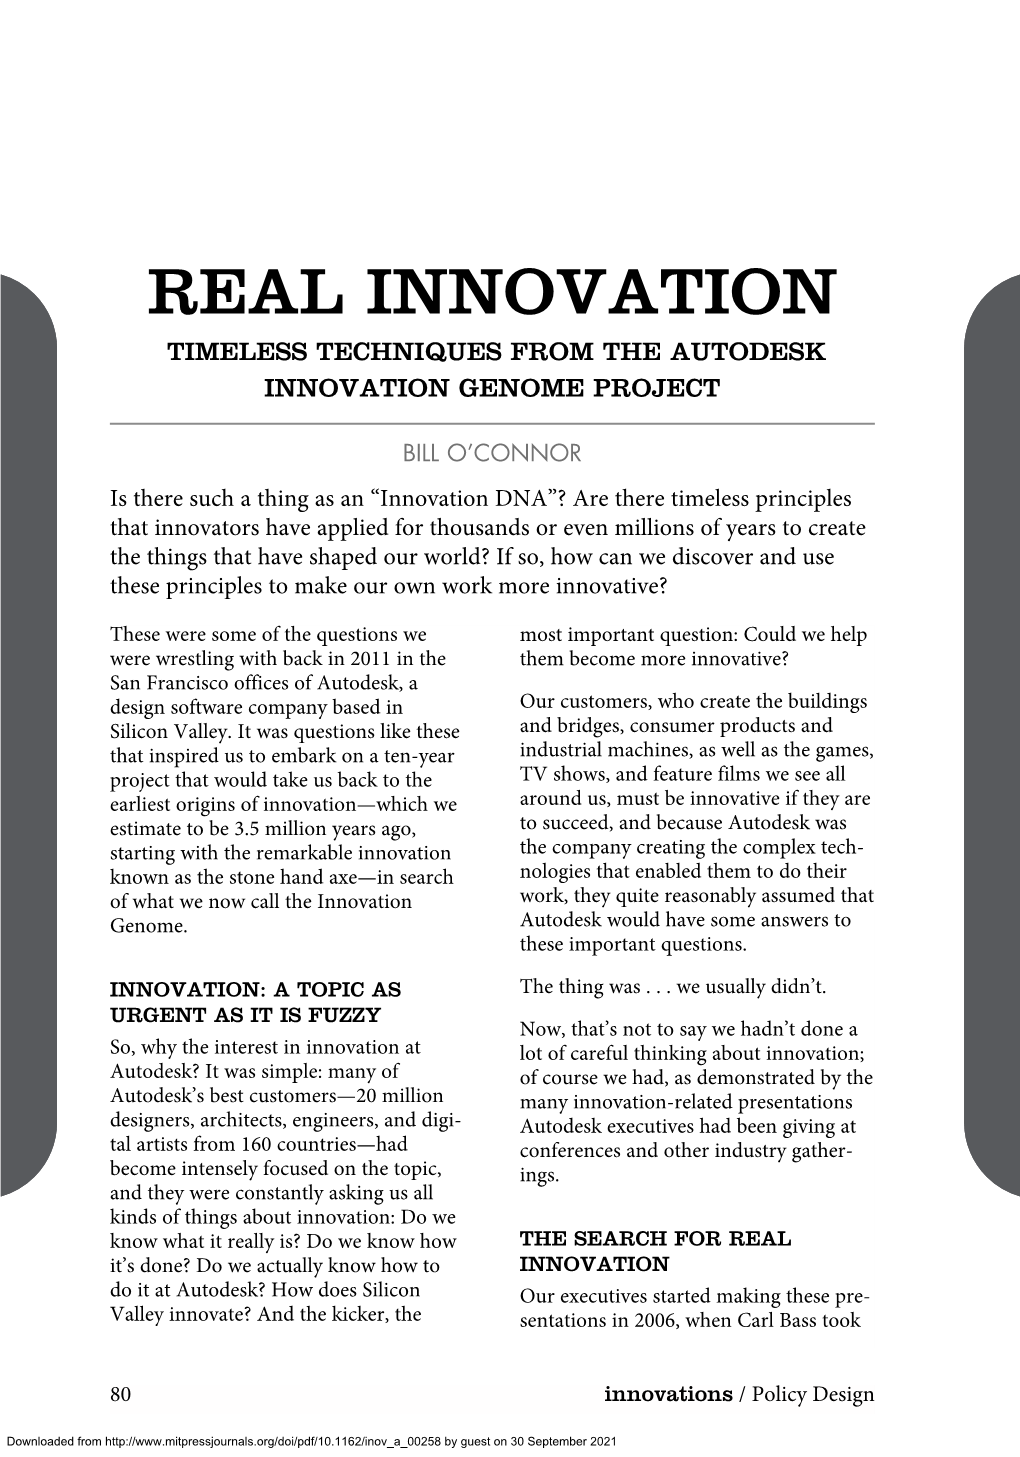 Real Innovation Timeless Techniques from the Autodesk Innovation Genome Project